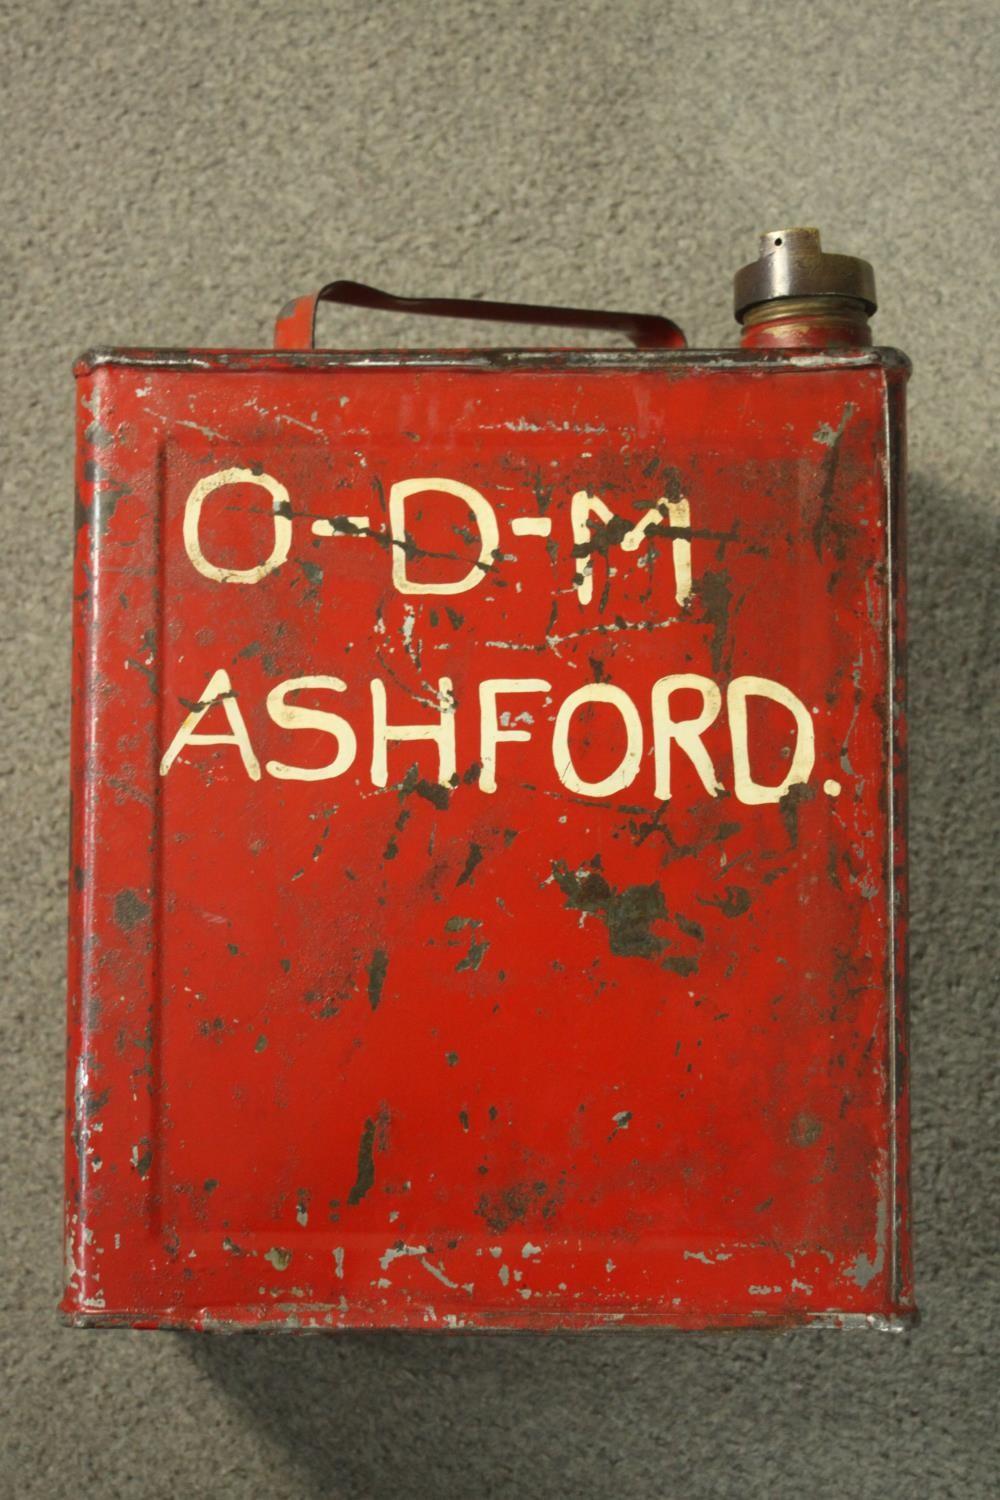 Four 20th century painted metal Jerry cans, marked for O-D-M Ashford, Insect Repellent, BP Ltd Shell - Image 3 of 6